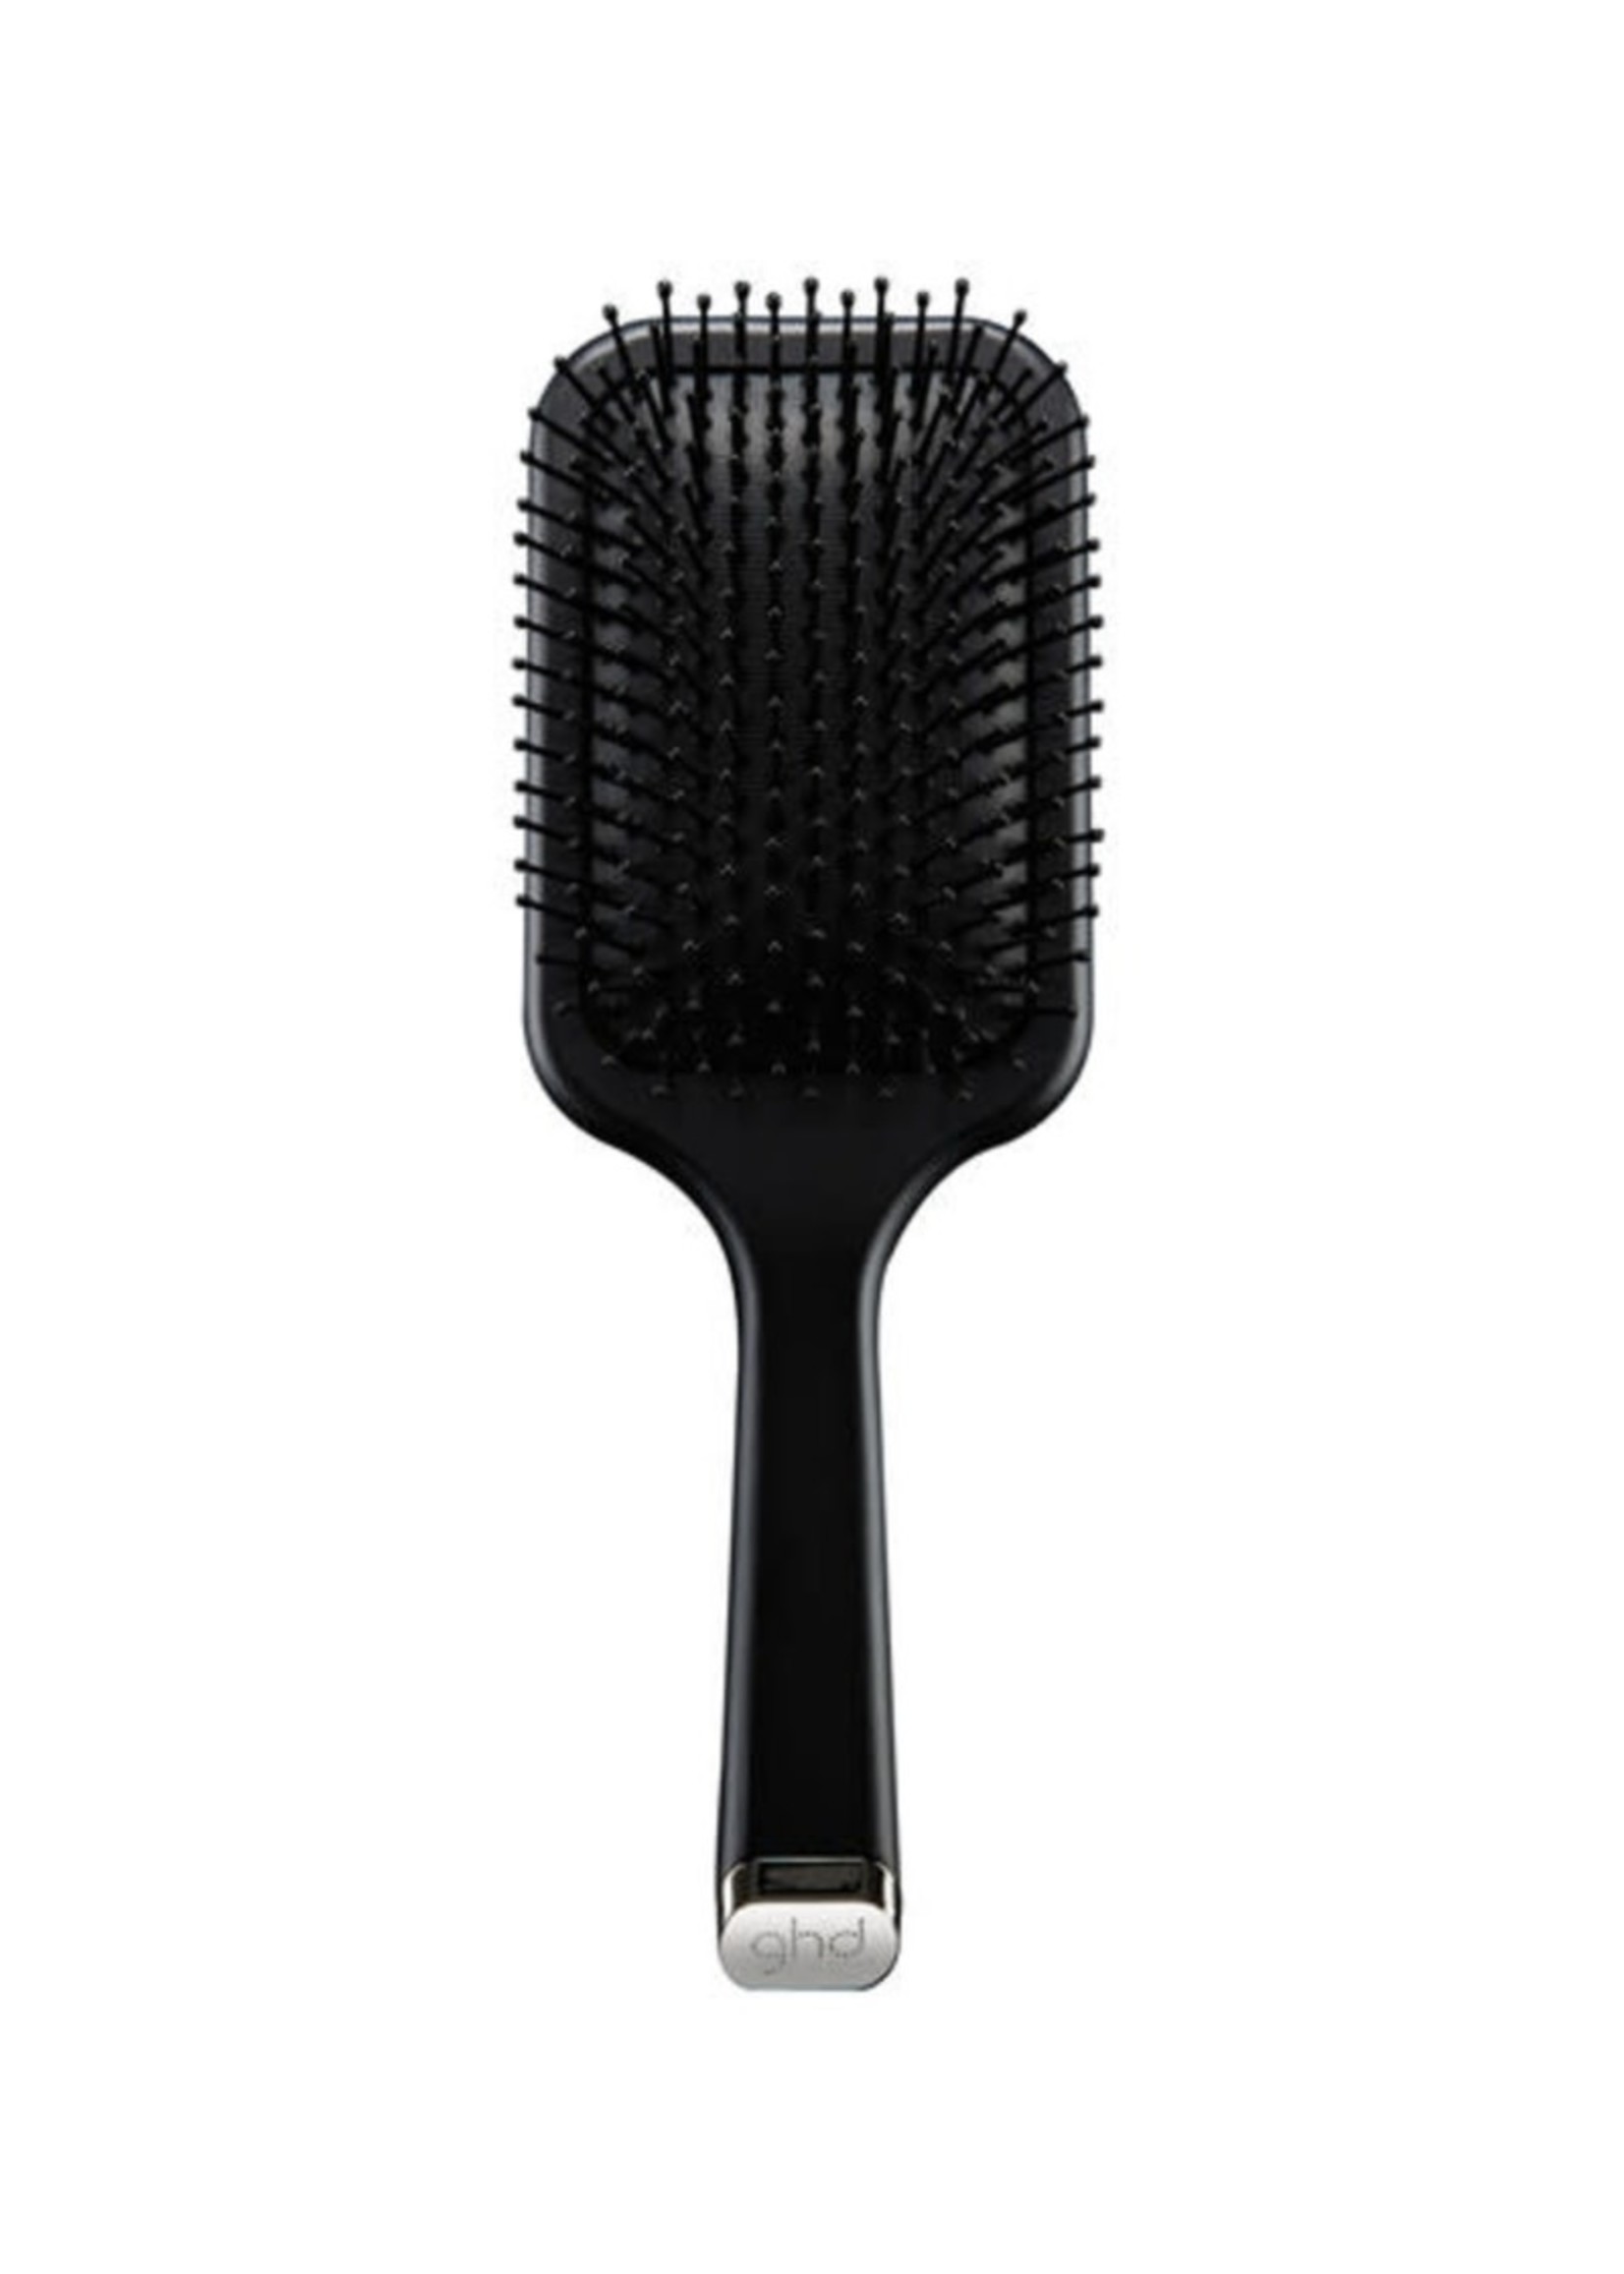 GHD GHD The All Rounder Paddle Brush